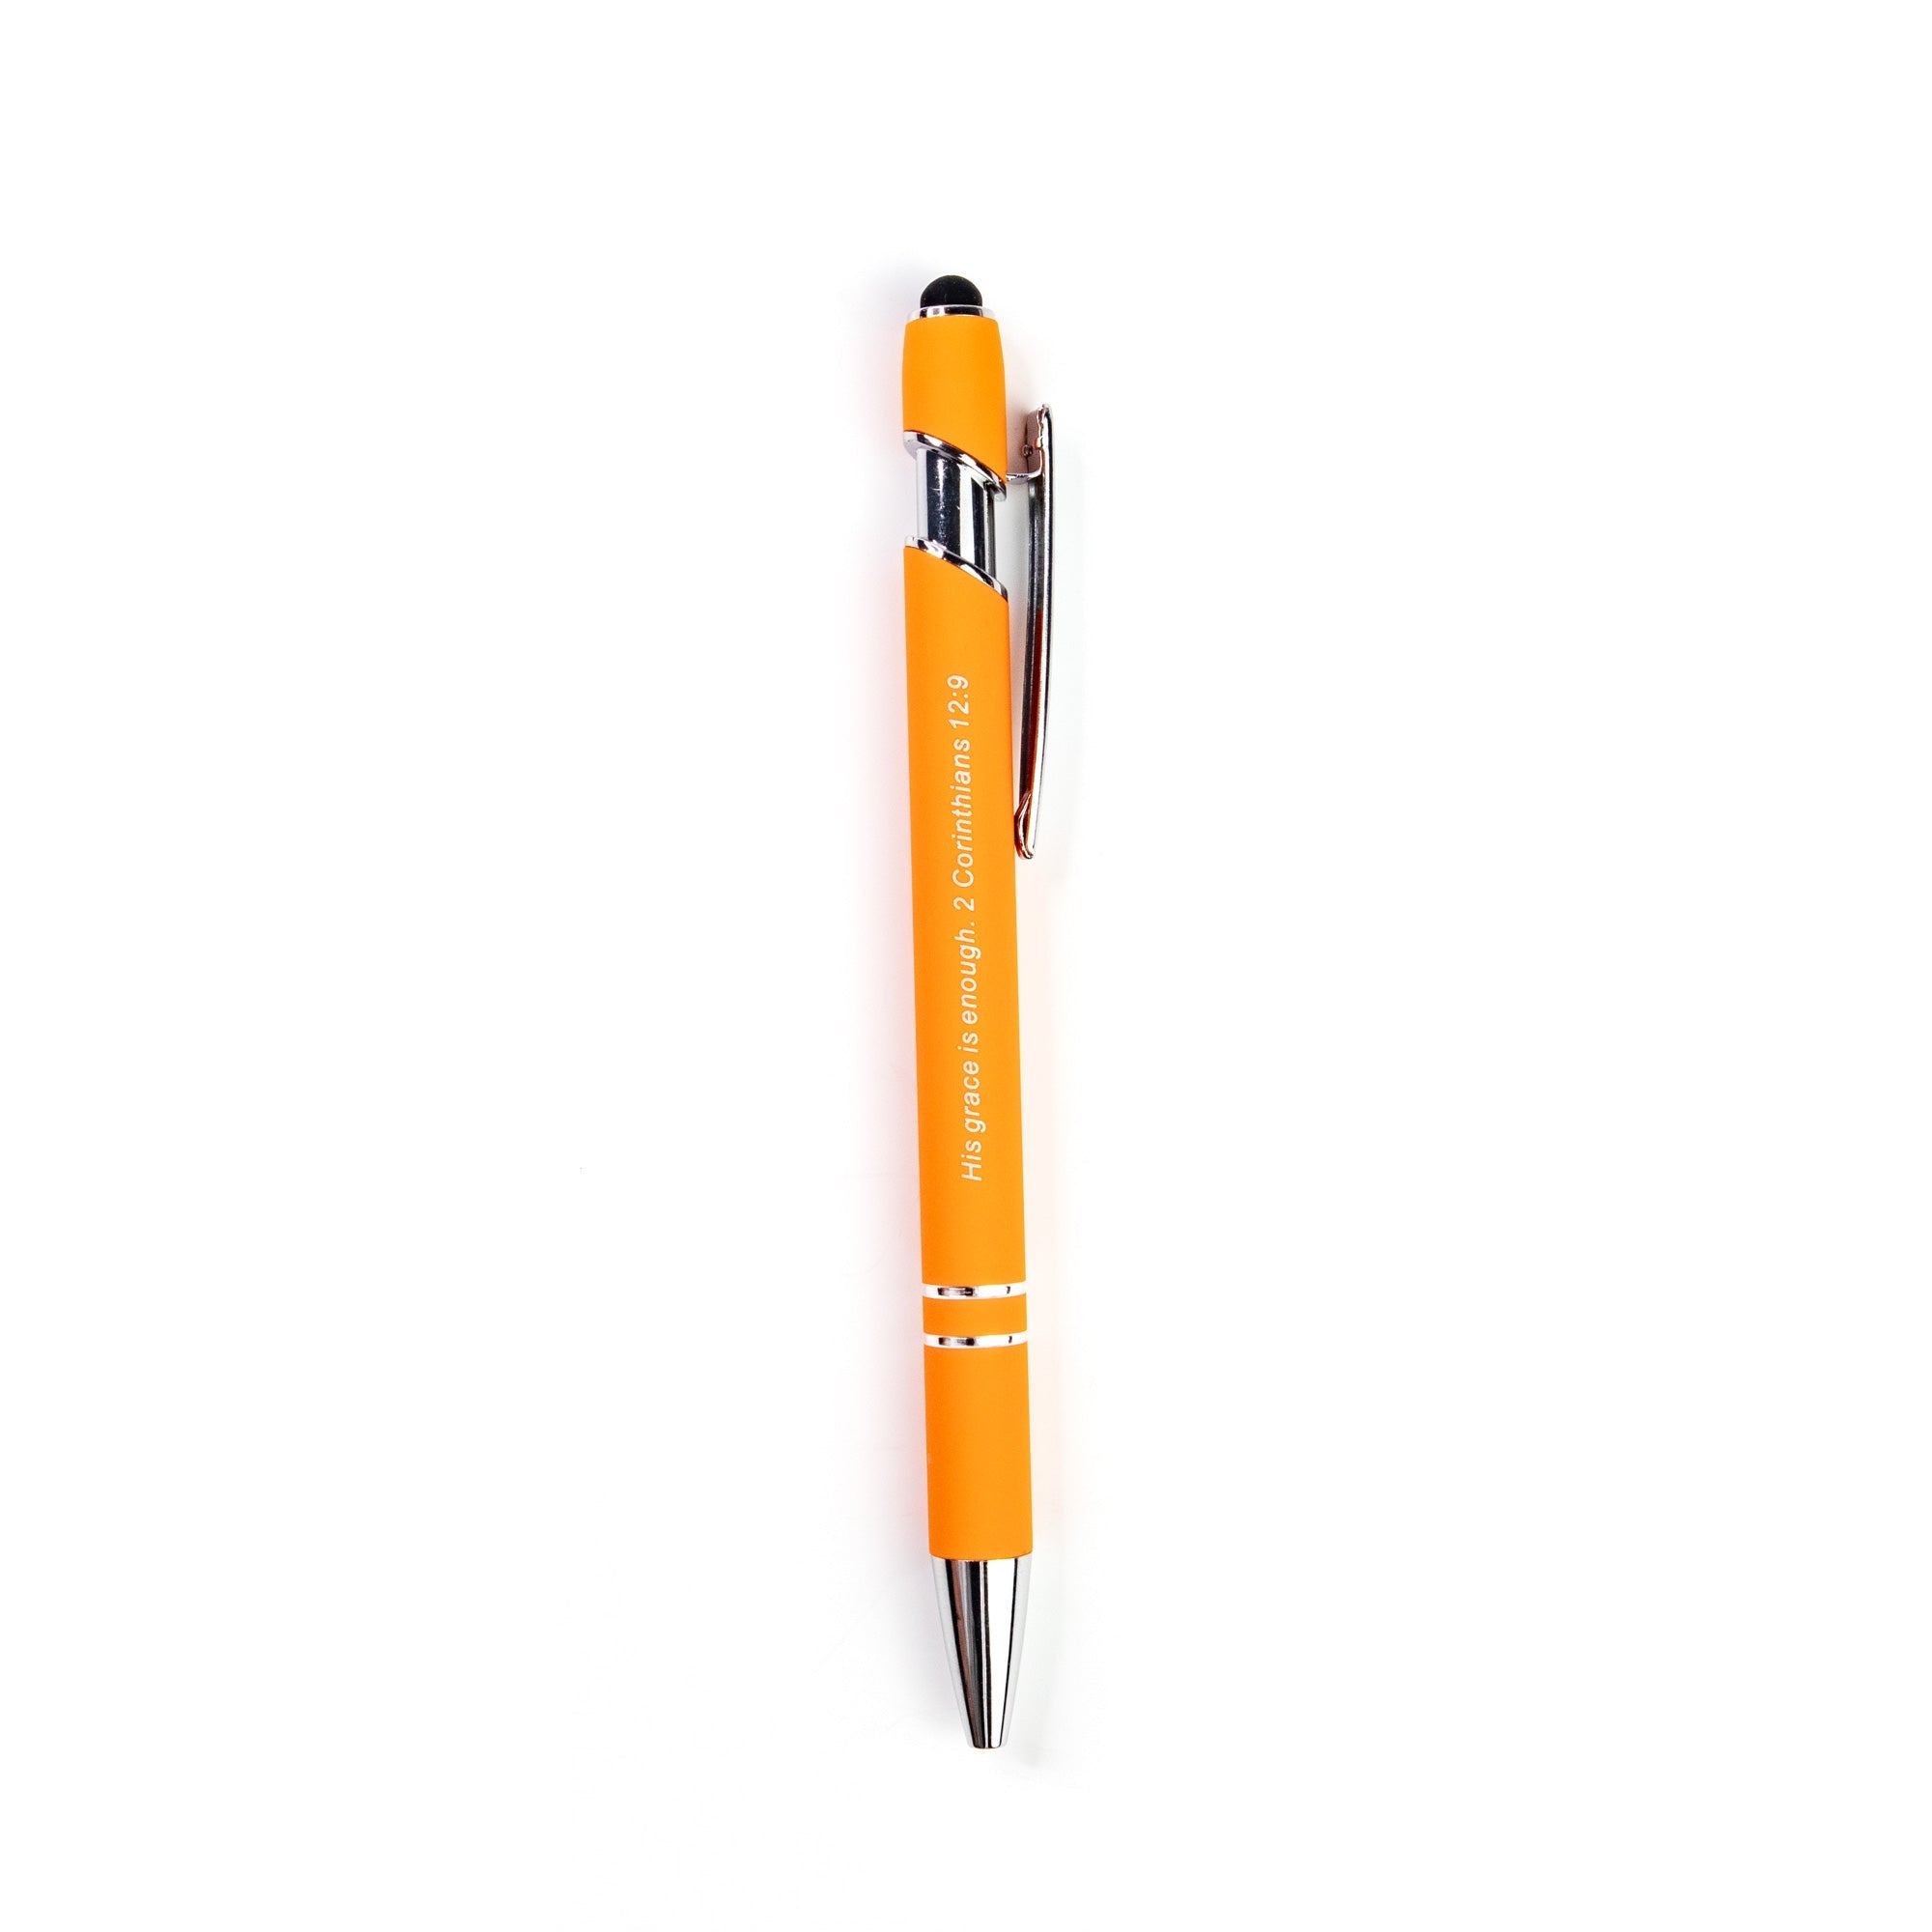 His Grace Scripture Pen with Stylus and Bookmark - Orange